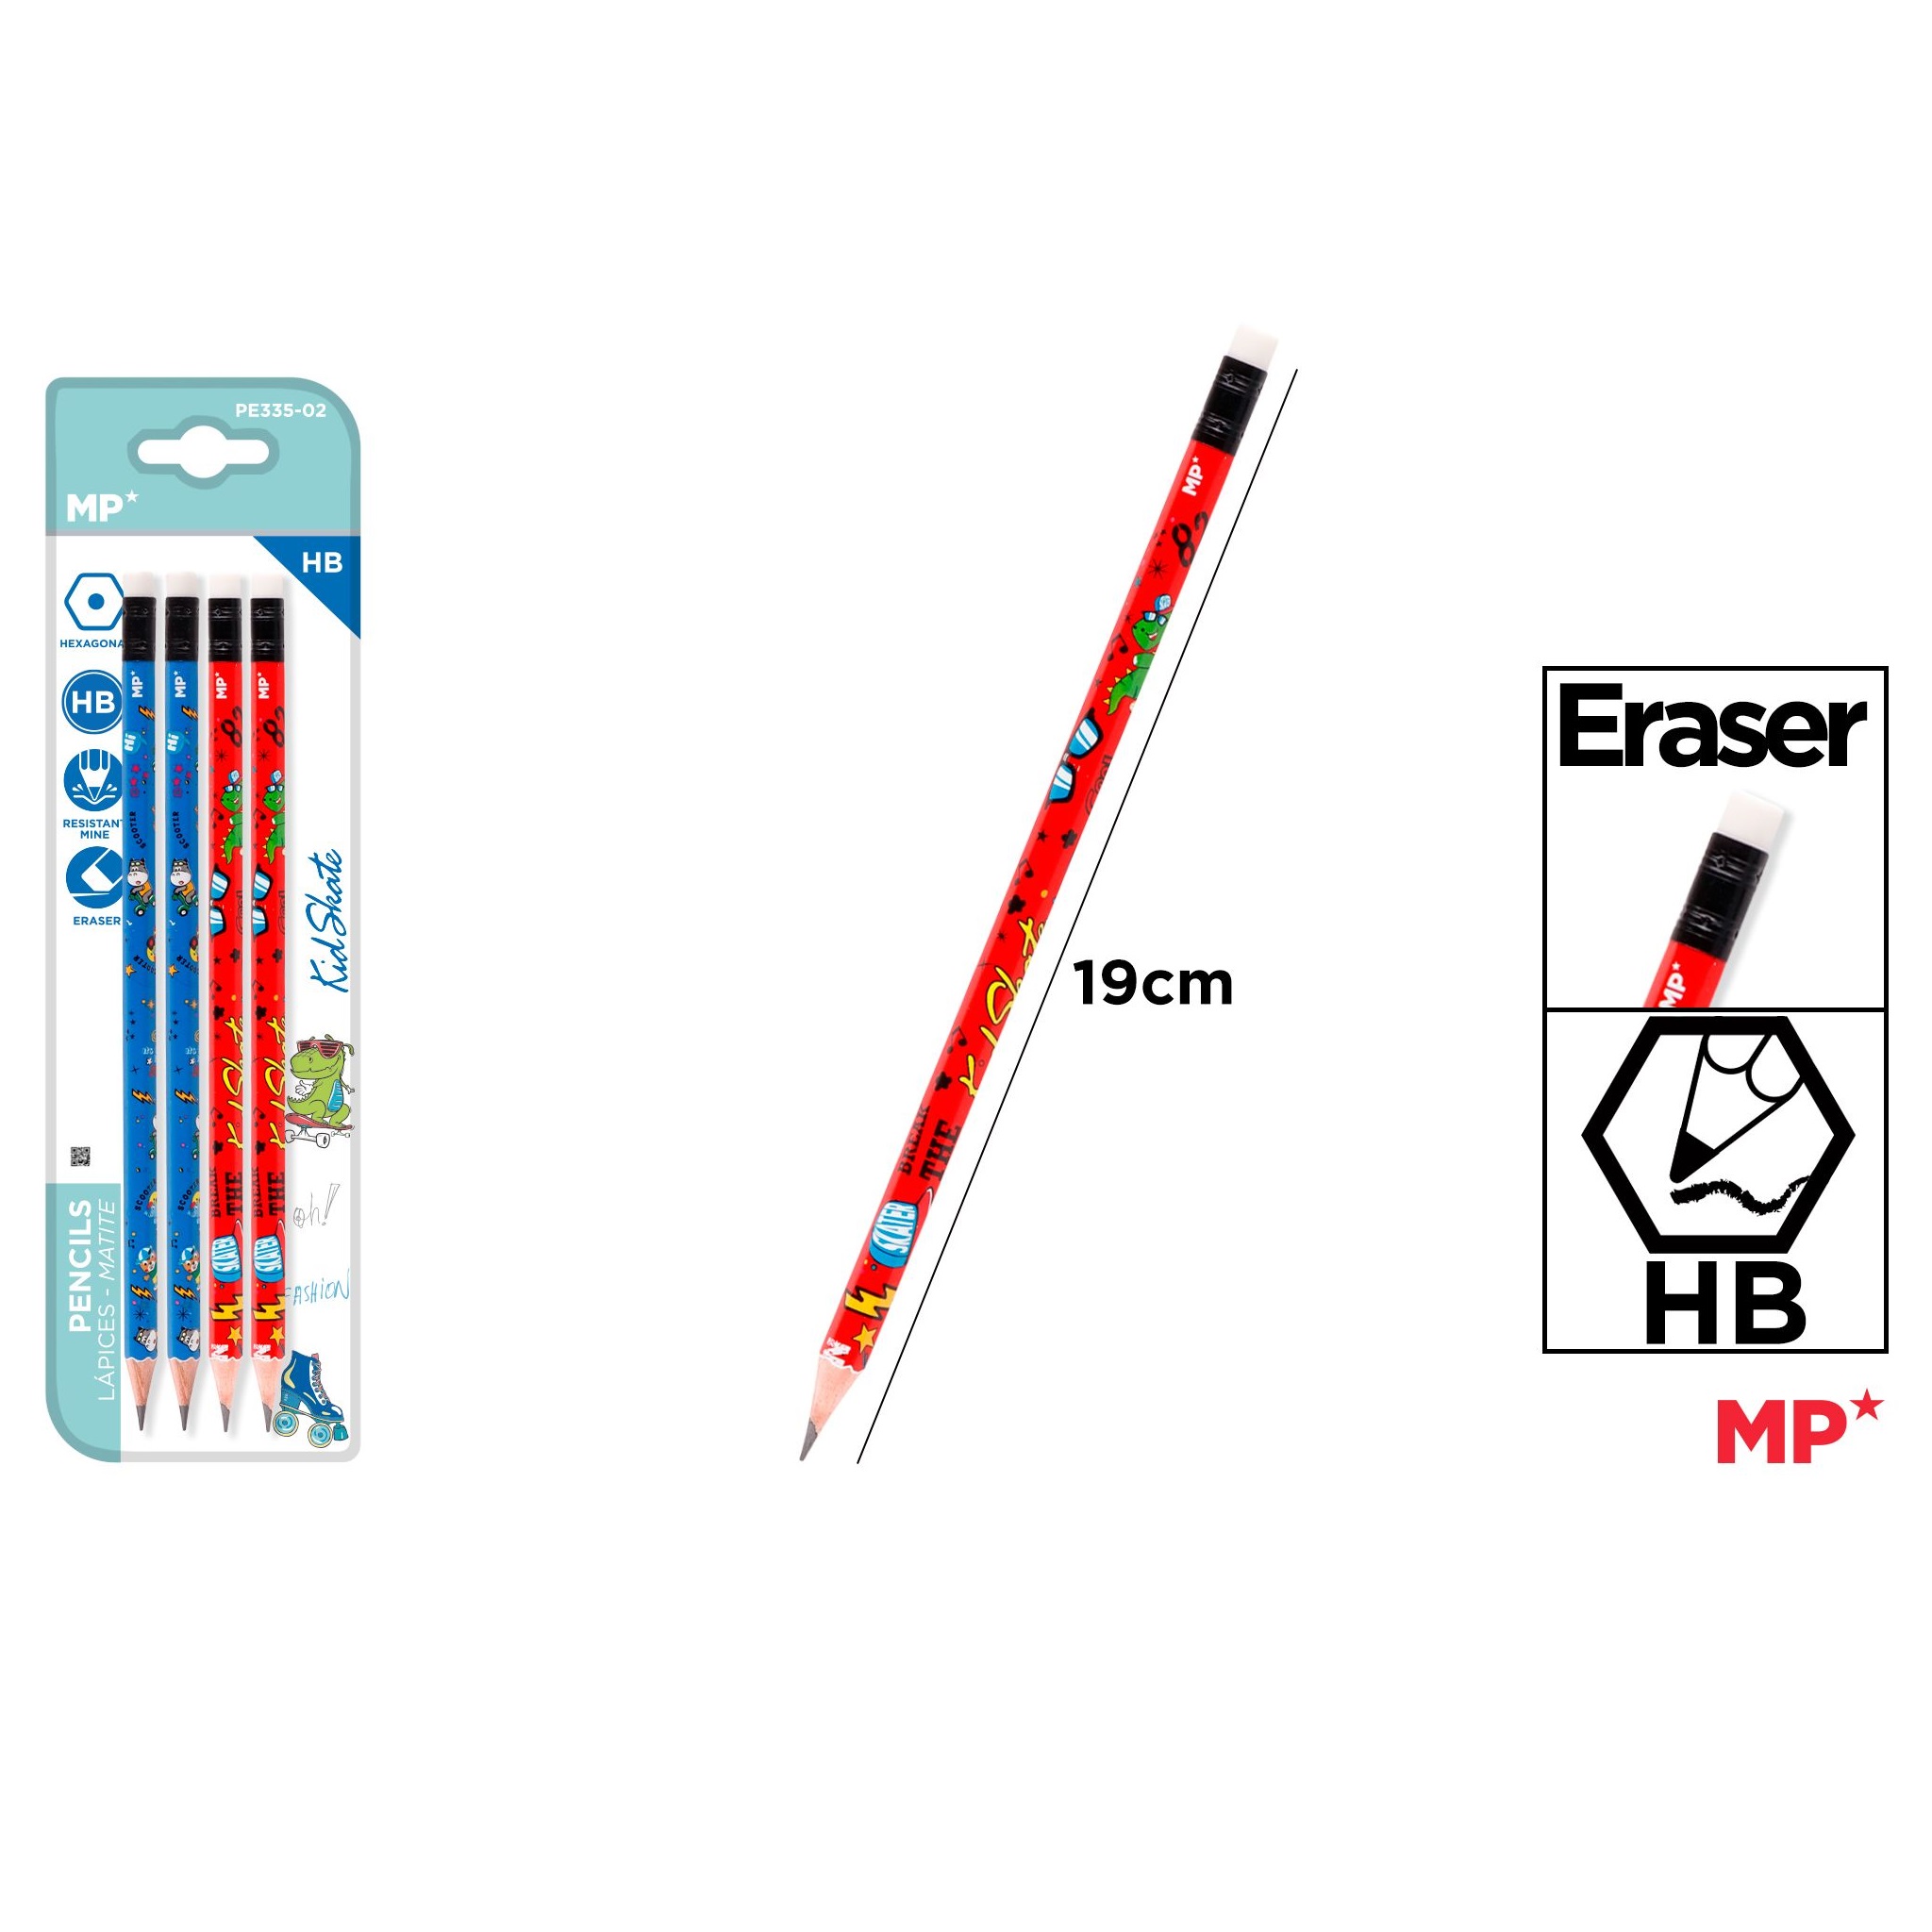 PE335 Fantasy Graphite Pencil Cartoon HB Pencil with Eraser Production and Supply